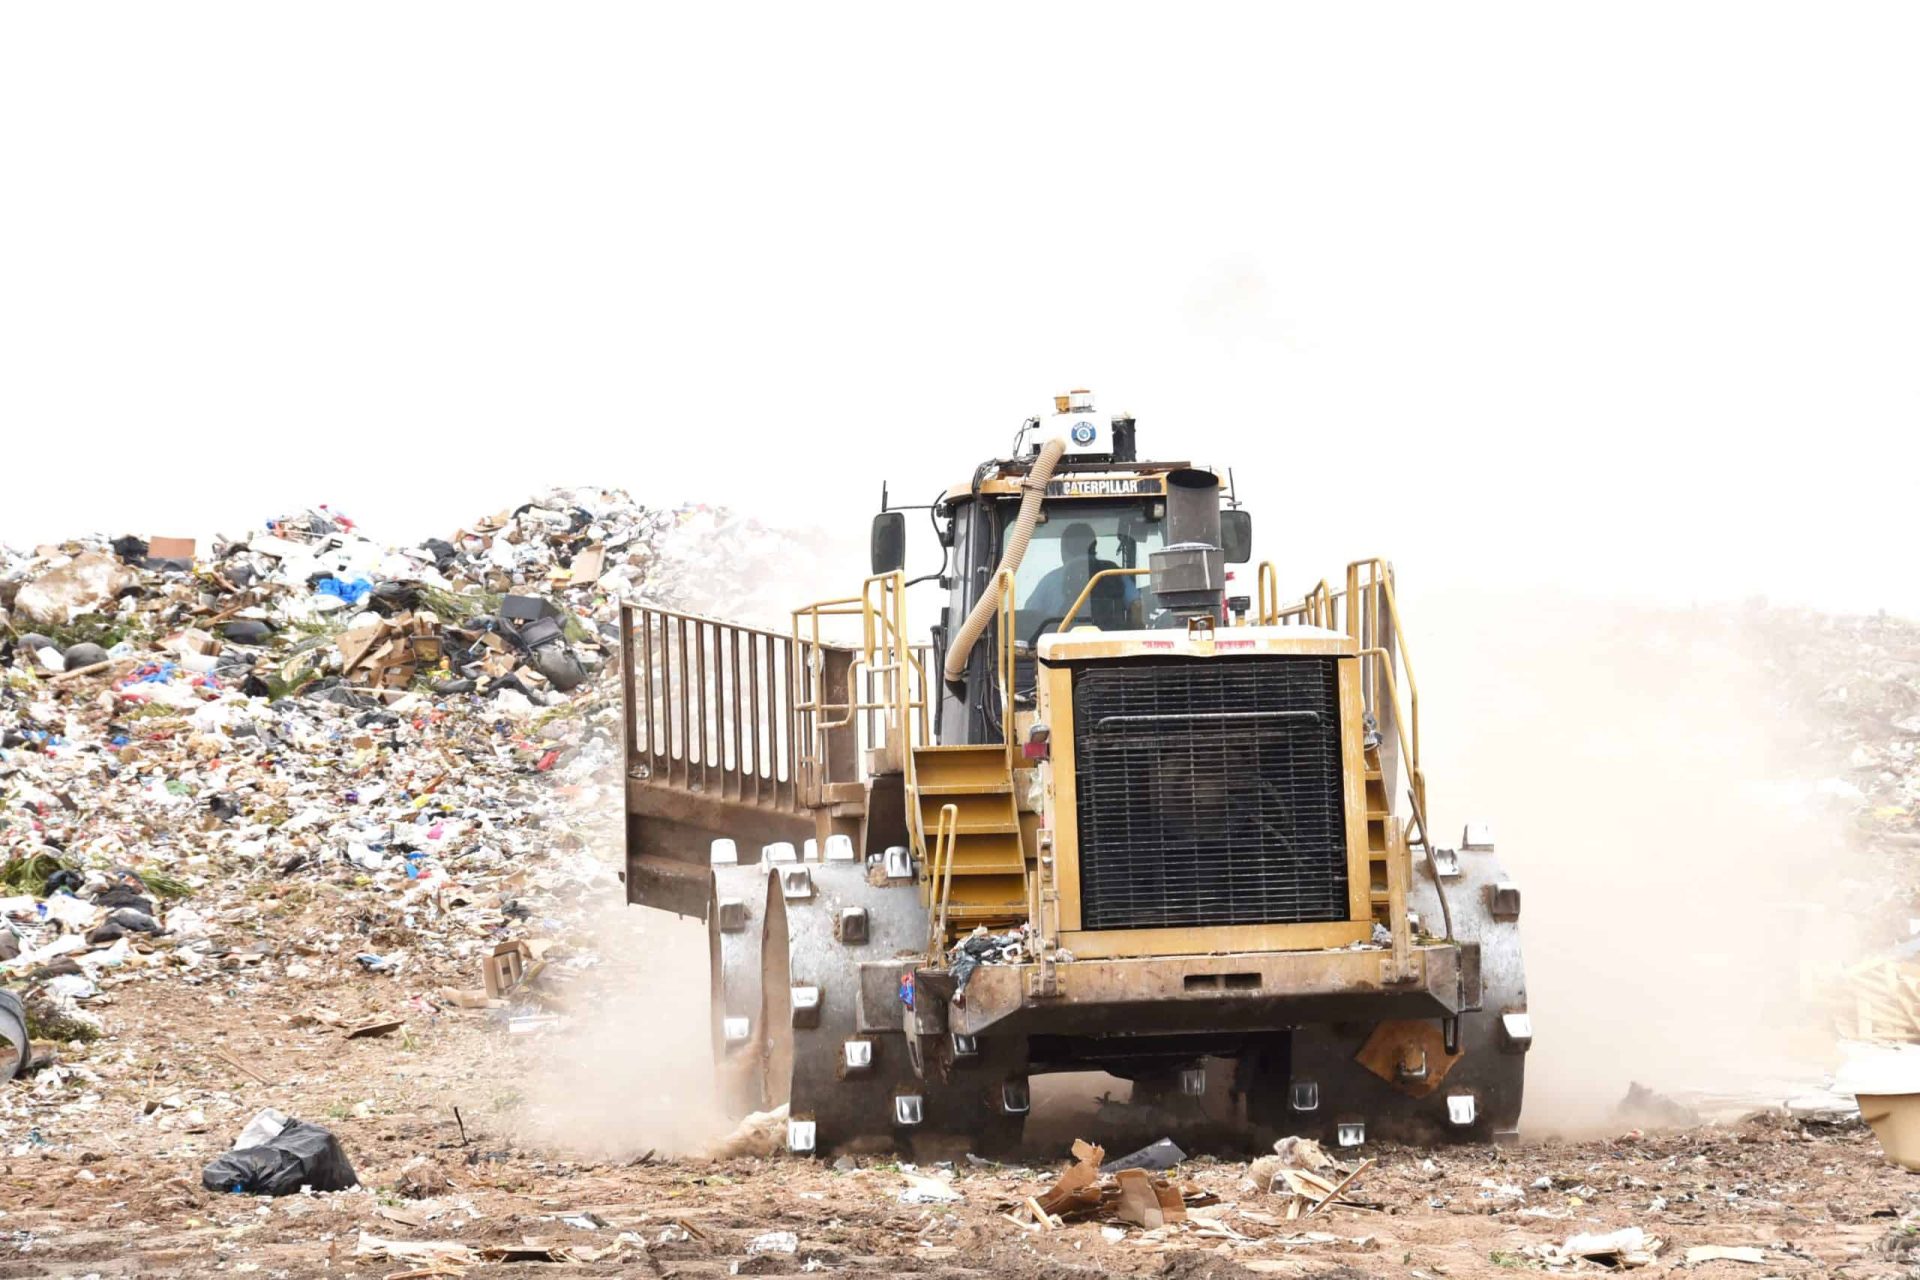 An Update on the Future of the Salt River Landfill